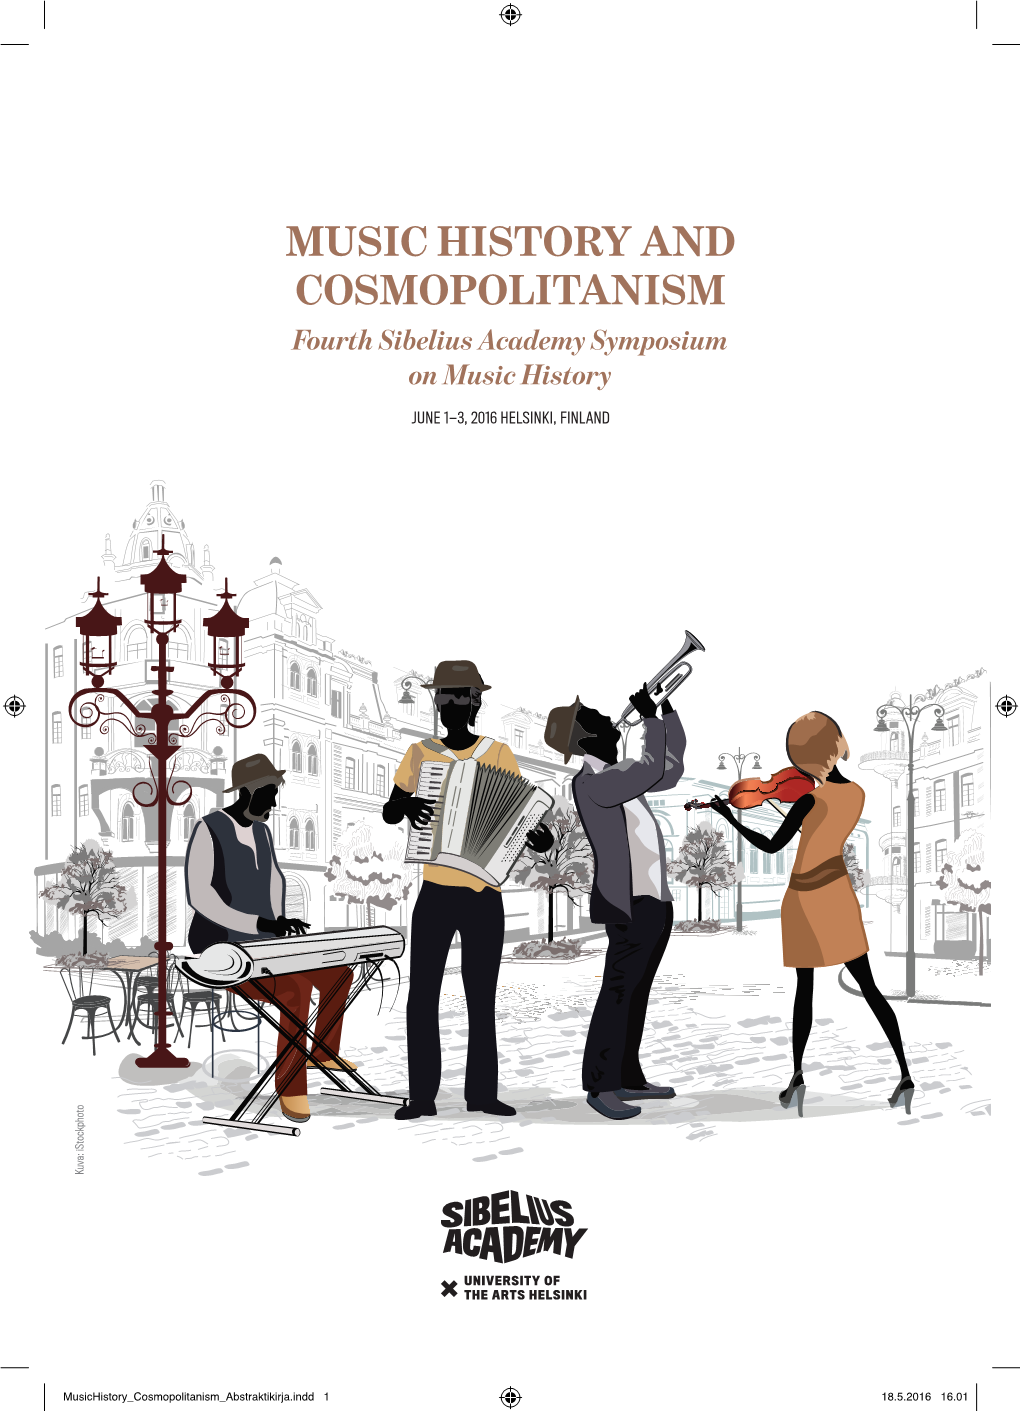 MUSIC HISTORY and COSMOPOLITANISM Fourth Sibelius Academy Symposium on Music History